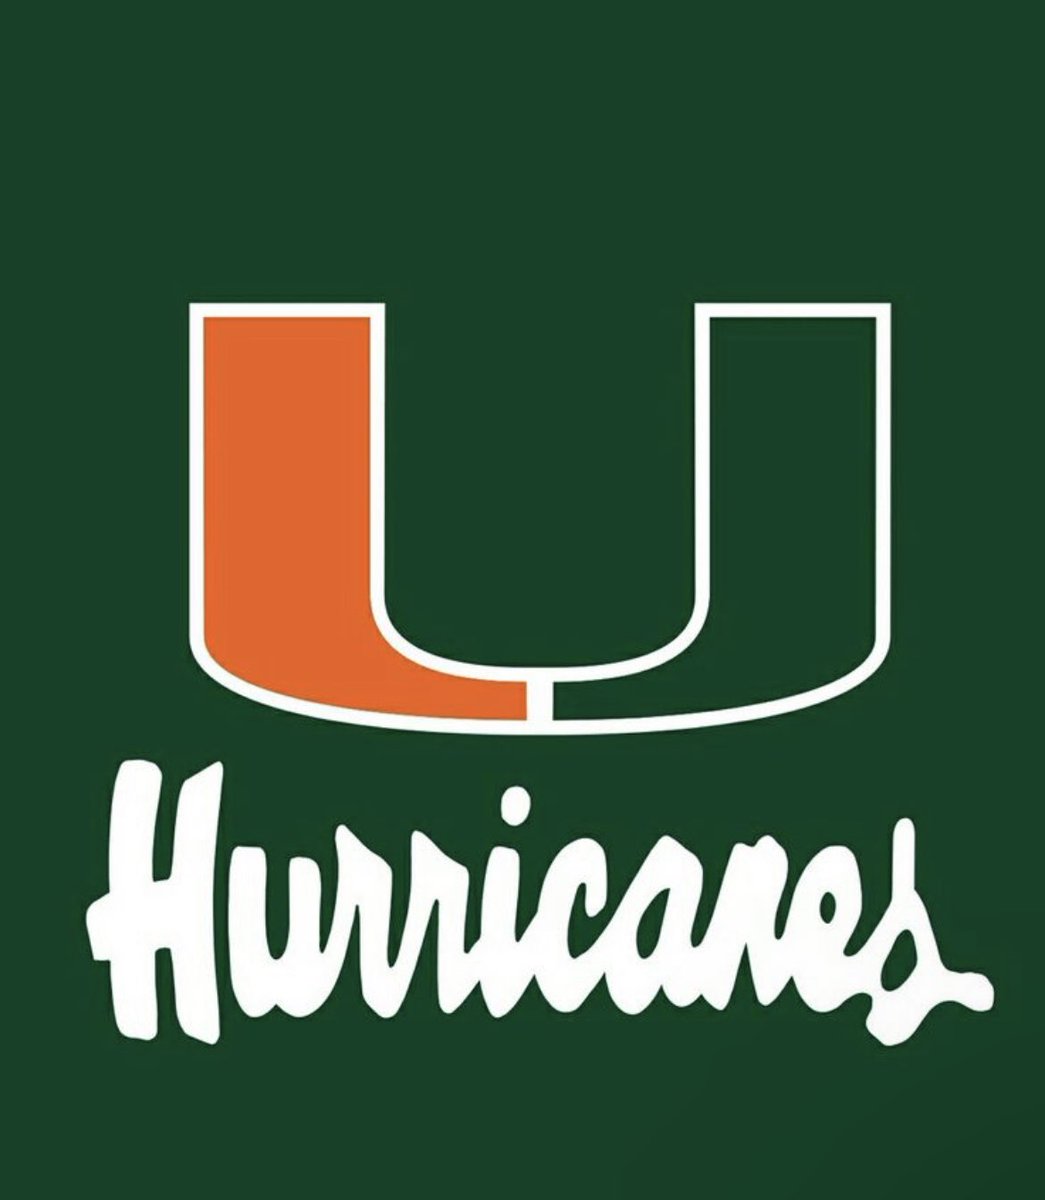 I will be at the UNIVERSITY OF MIAMI this week 🟢🟠 #GoCanes @CanesFootball @Coach_Addae @coach_cristobal @CoachField @GregBiggins @ChadSimmons_ @adamgorney @CoachTroop3 @coach_o_sports